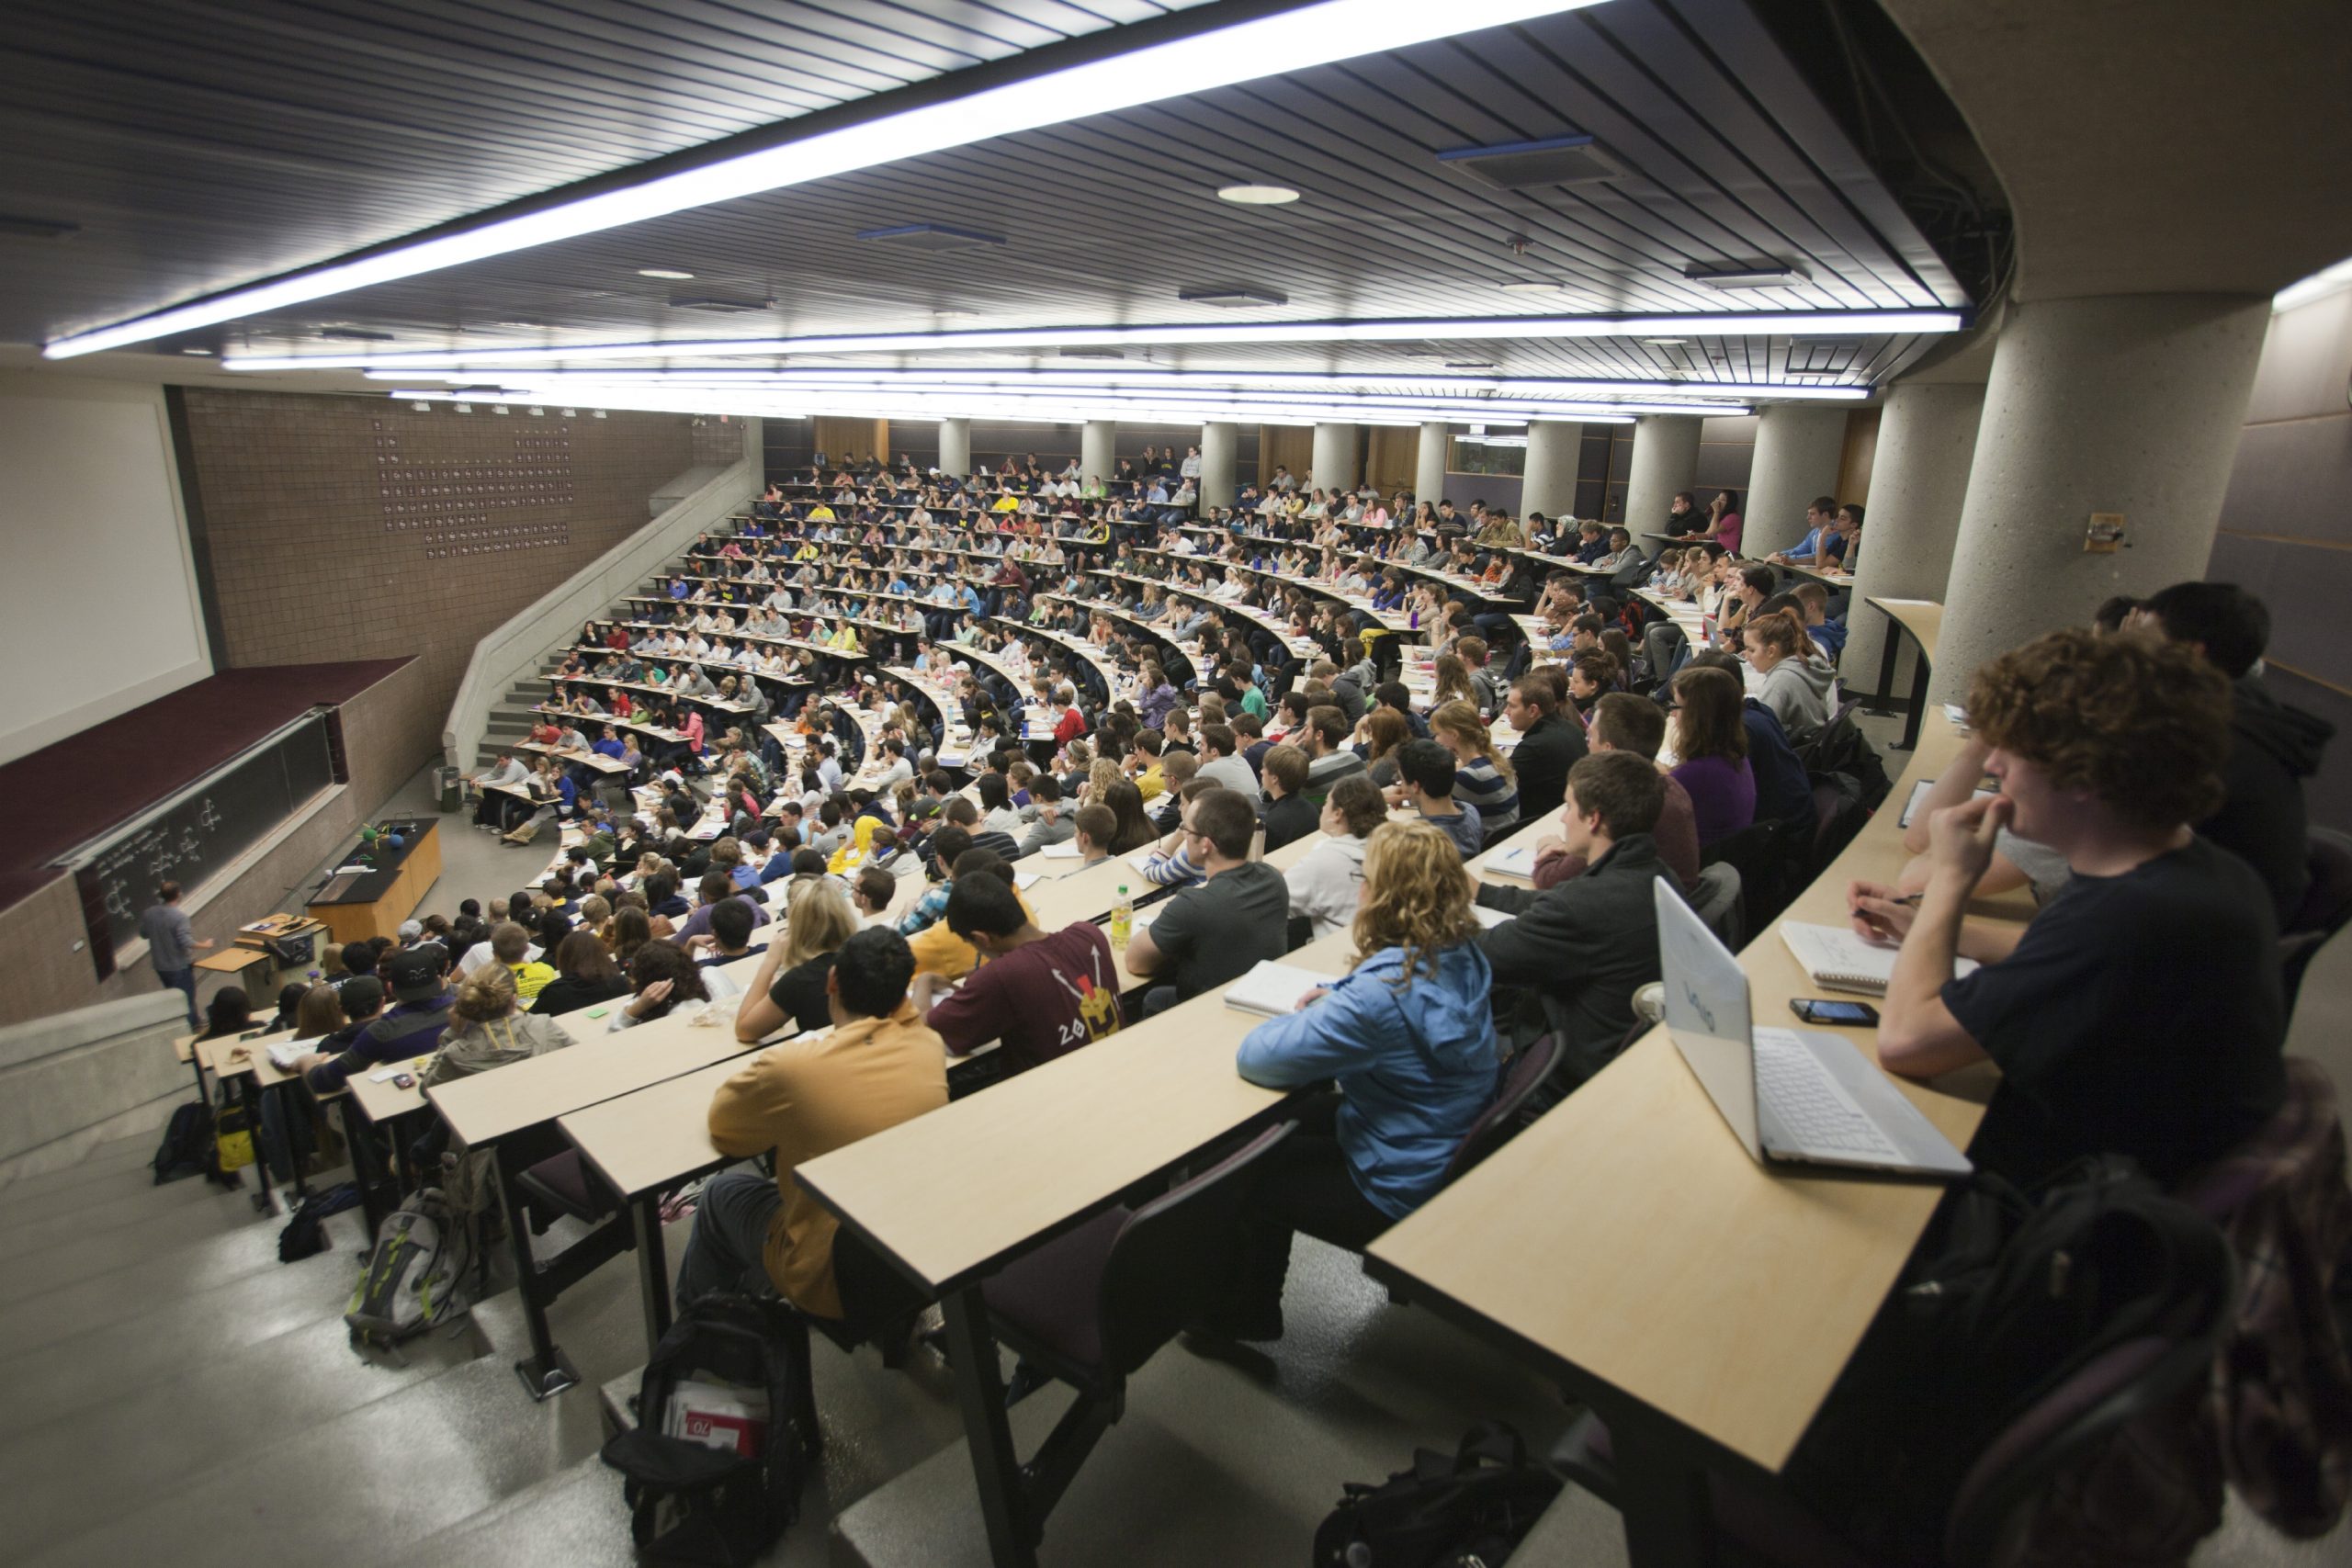 University Announces 500-Person Lectures With Required Attendance As Mass Inoculation Plan